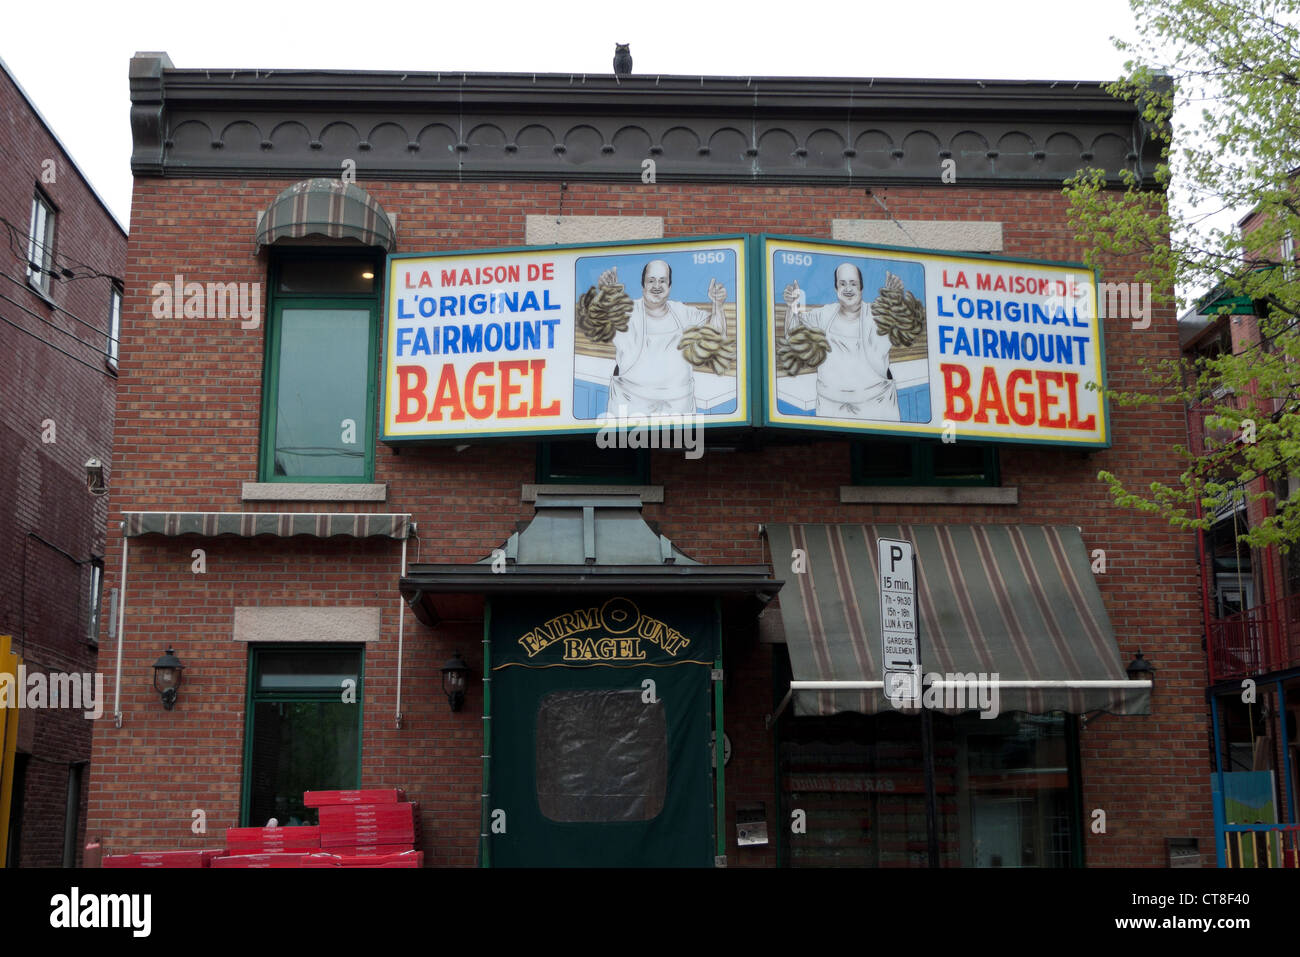 Fairmount Bagel bakery selling famous bagels exterior view in Montreal, Quebec, Canada  KATHY DEWITT Stock Photo